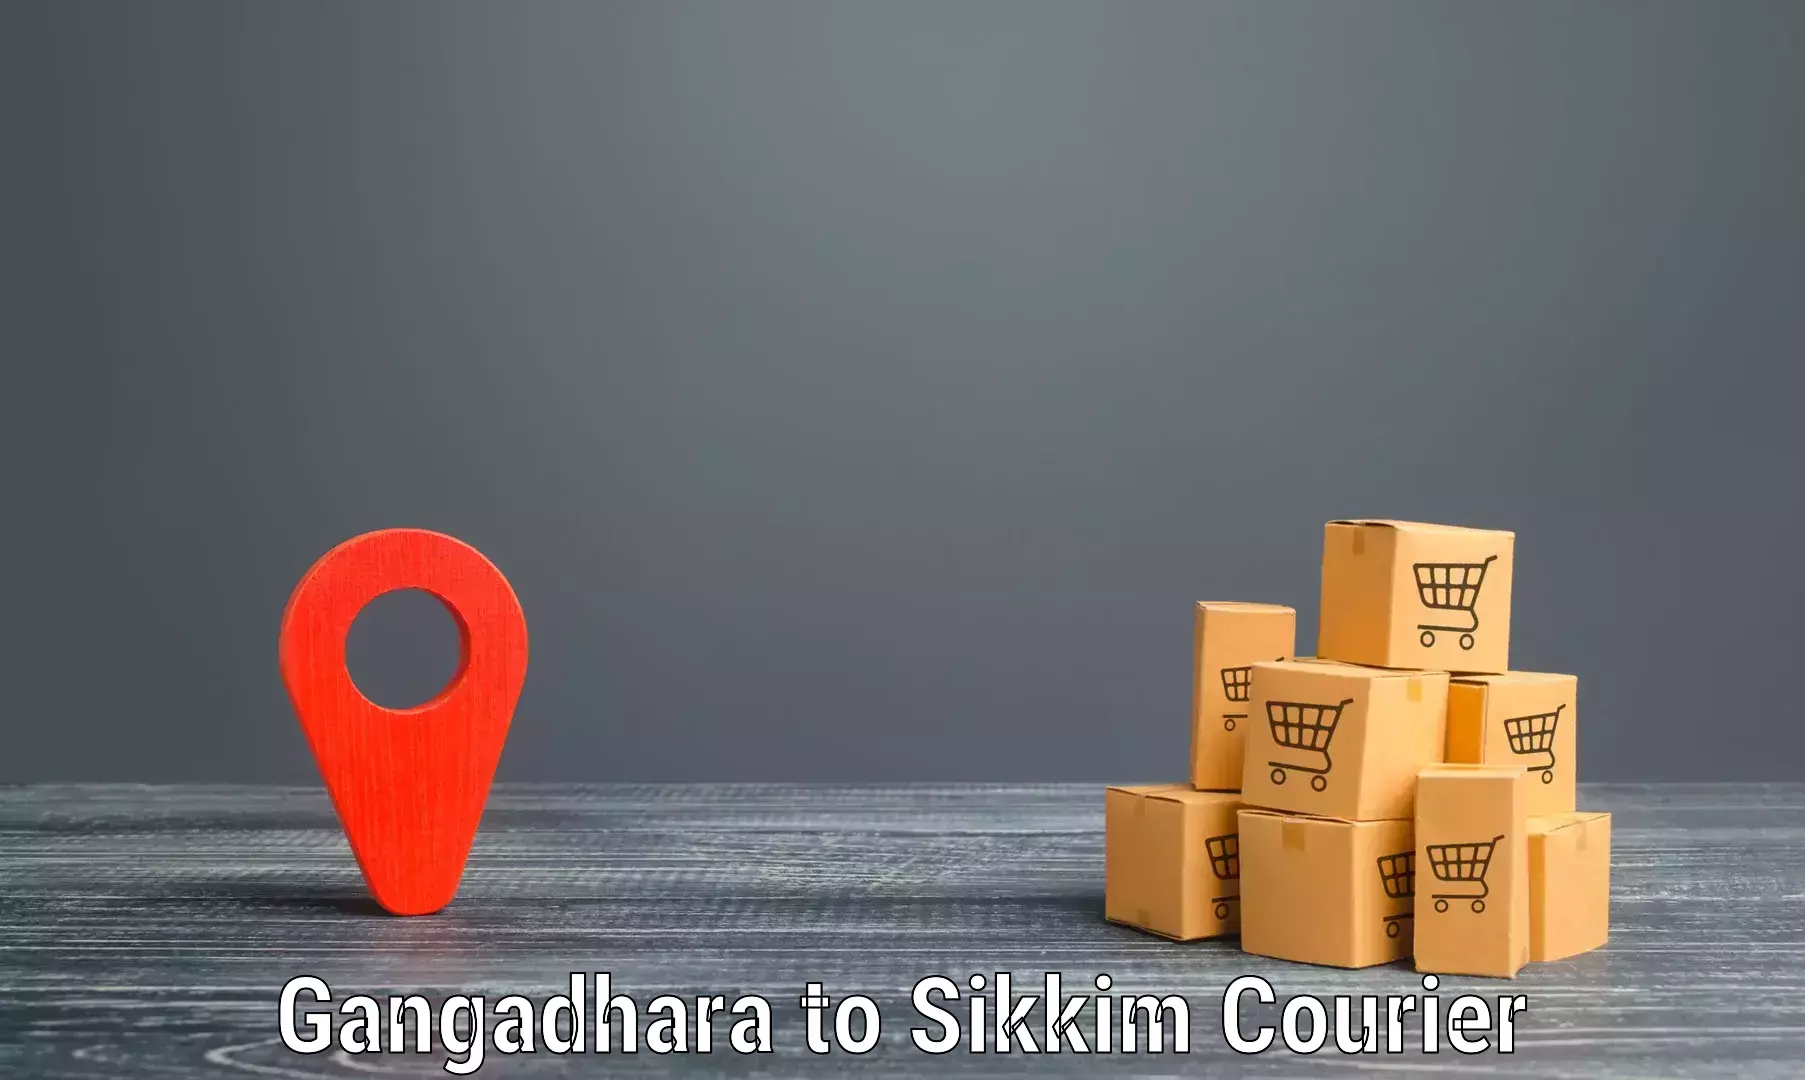 Reliable delivery network Gangadhara to Gangtok